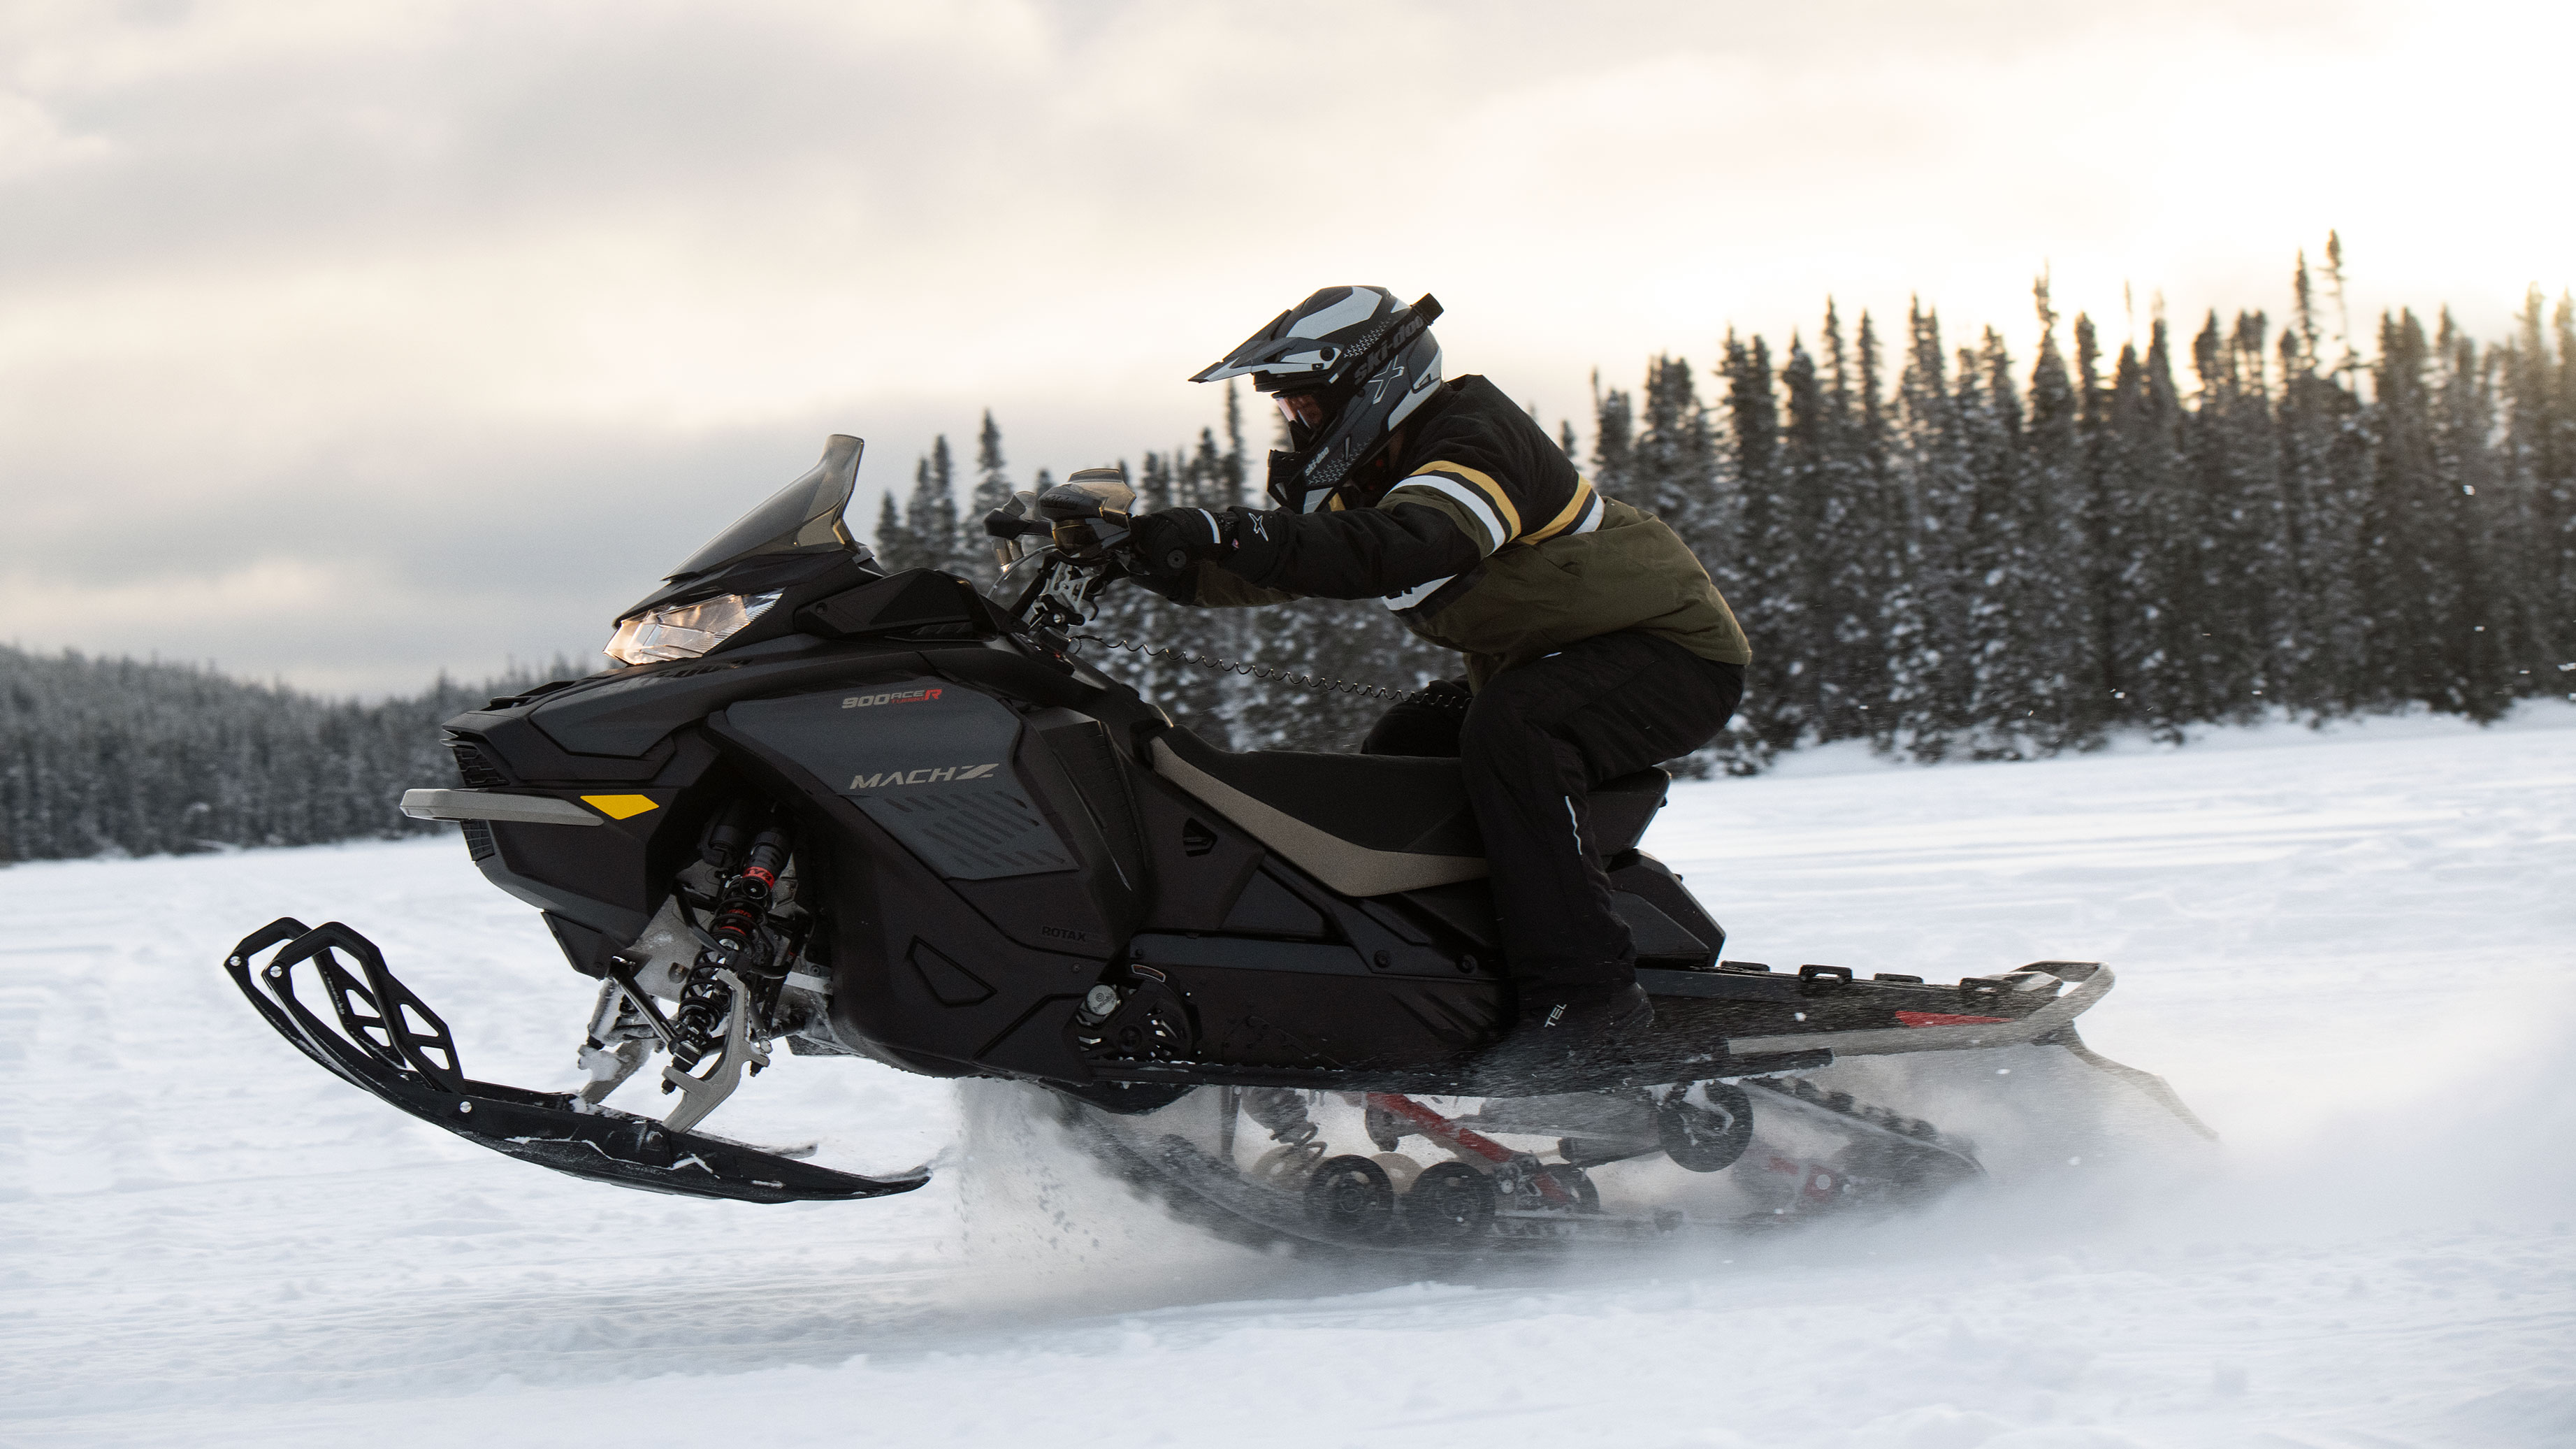 Men on his Ski-Doo MACH Z activating the Launch Mode